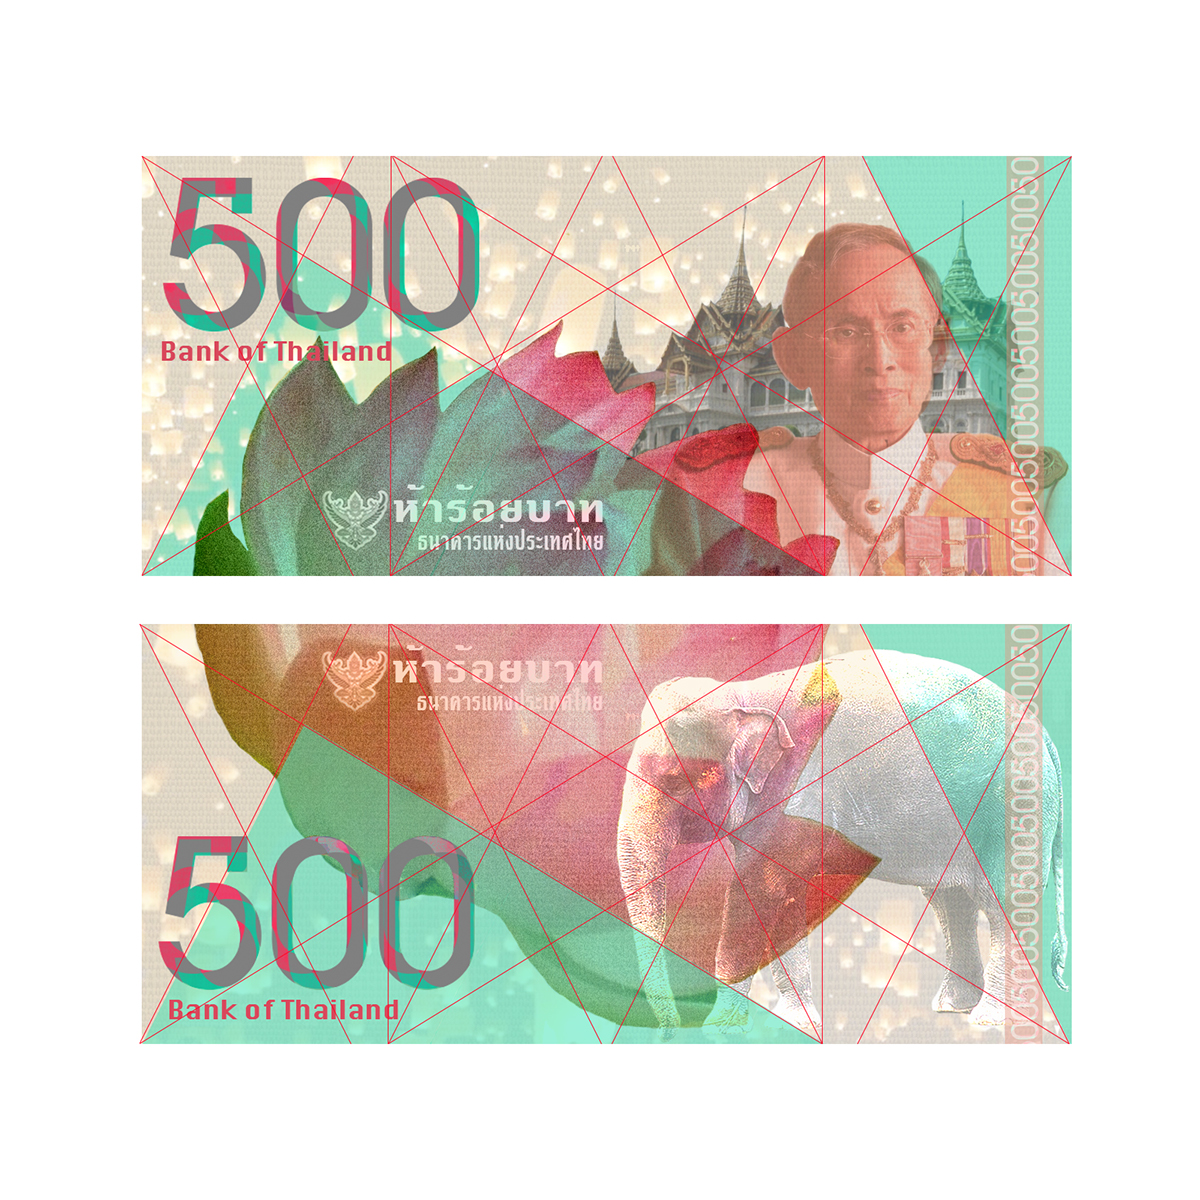 currency Thailand layers sacred geometry golden section elephant 500 baht Photo Manipulation 